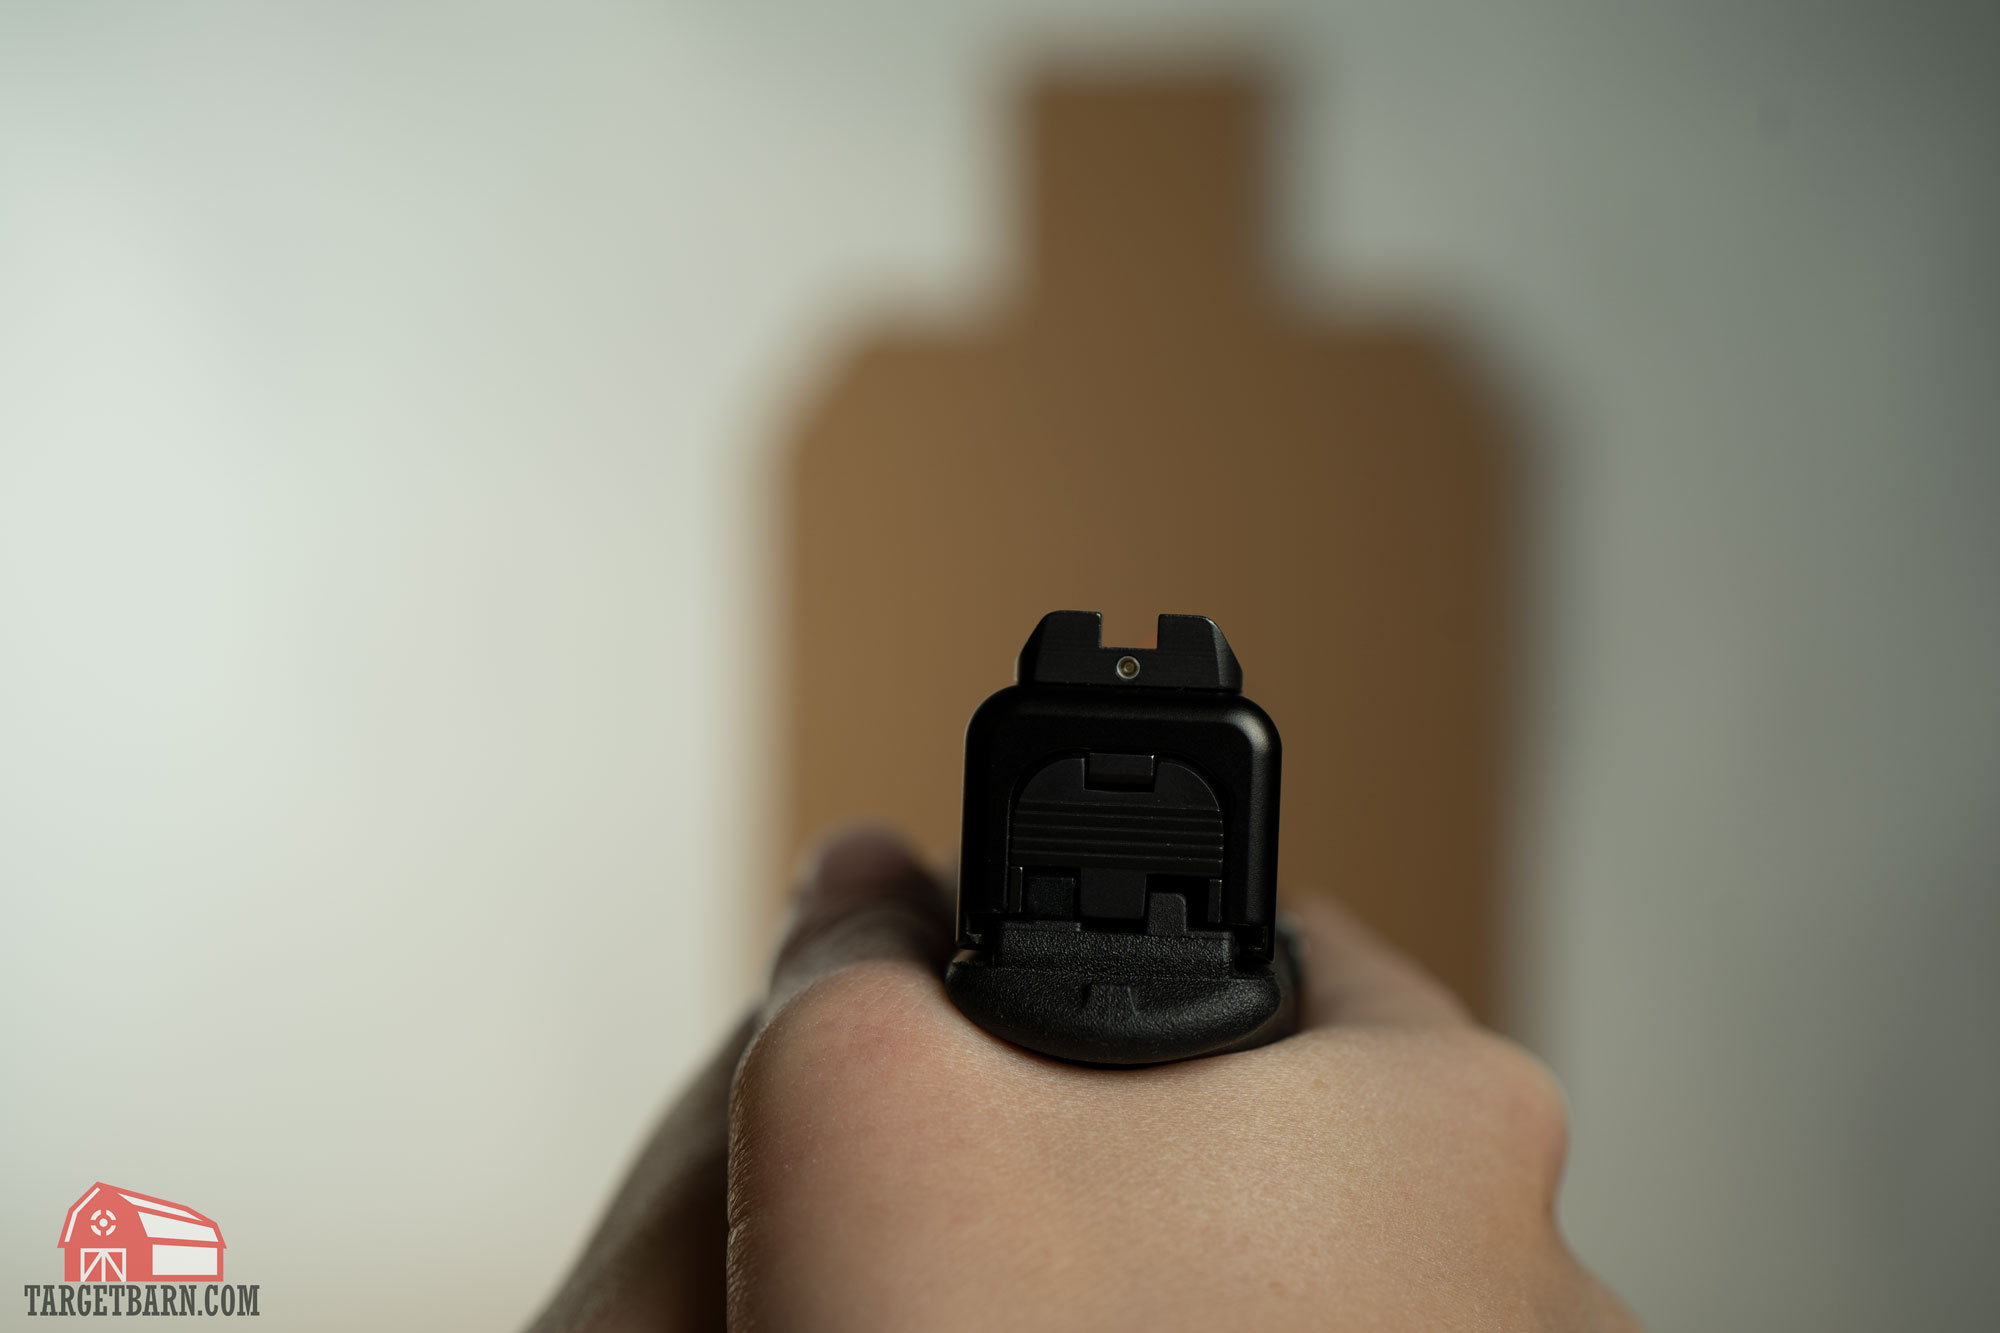 with gross index sight picture, the reference is on the back of the gun